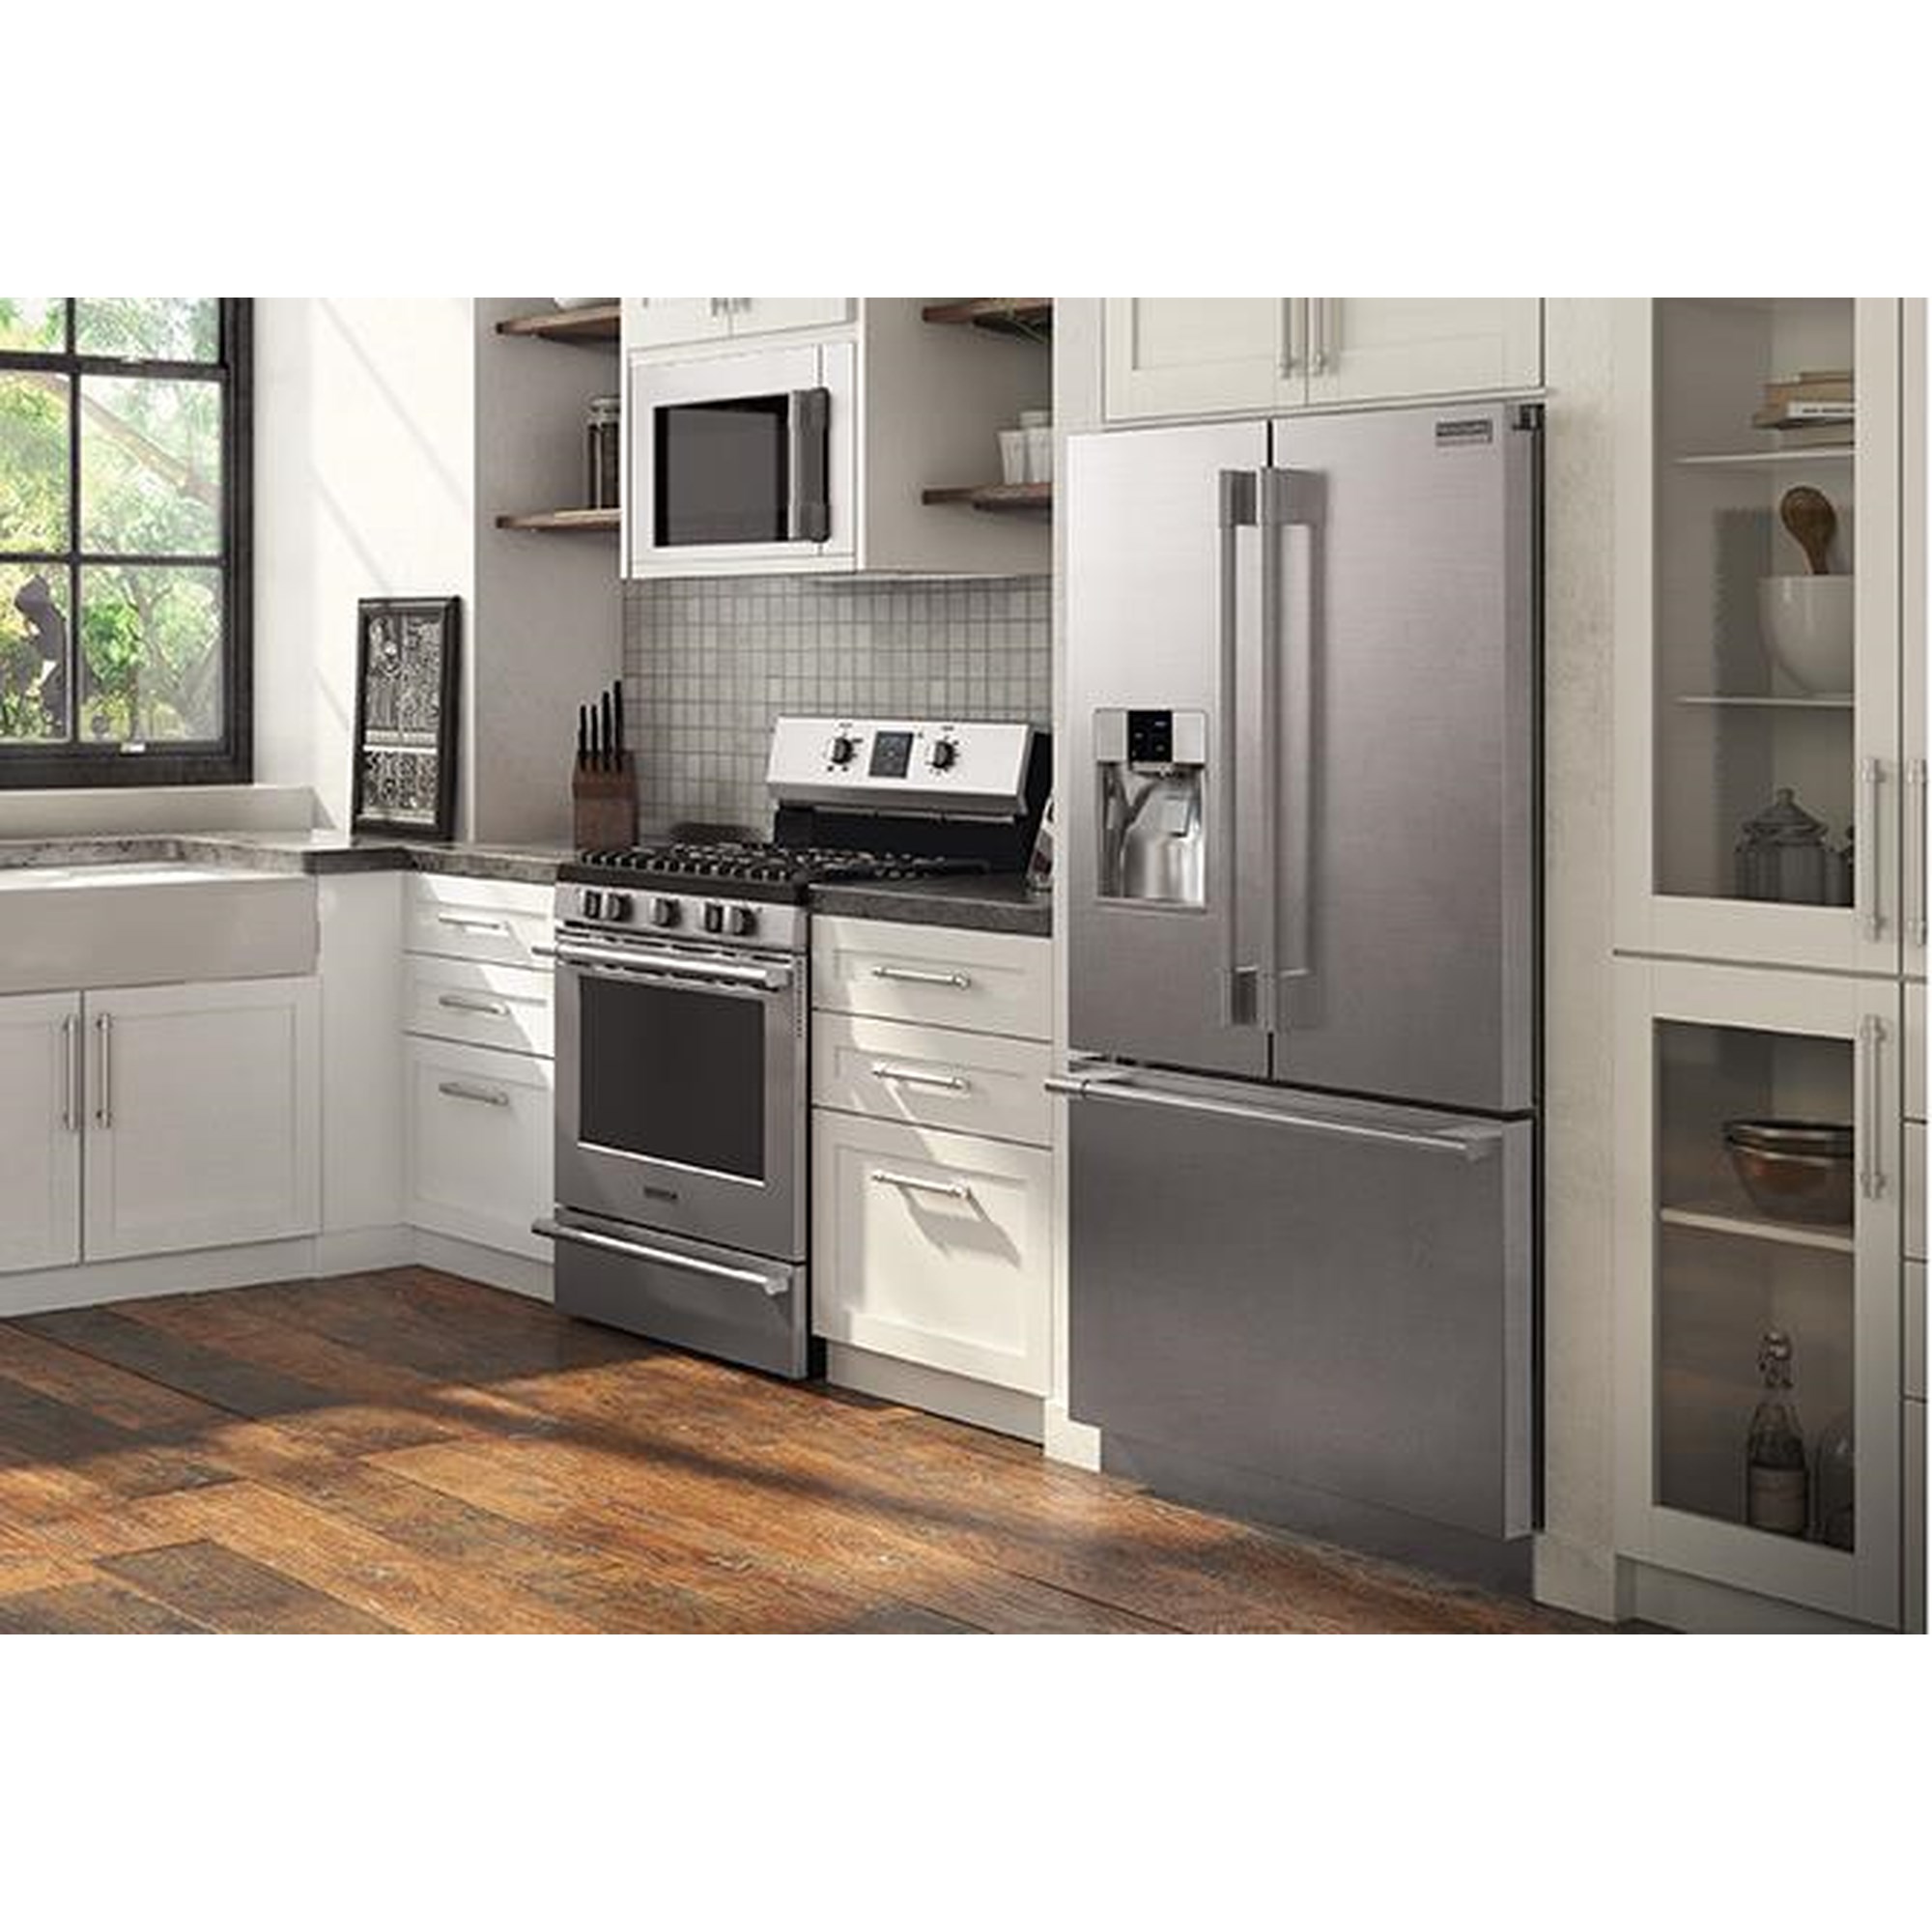 Refrigerators and Microwaves for College Cooking